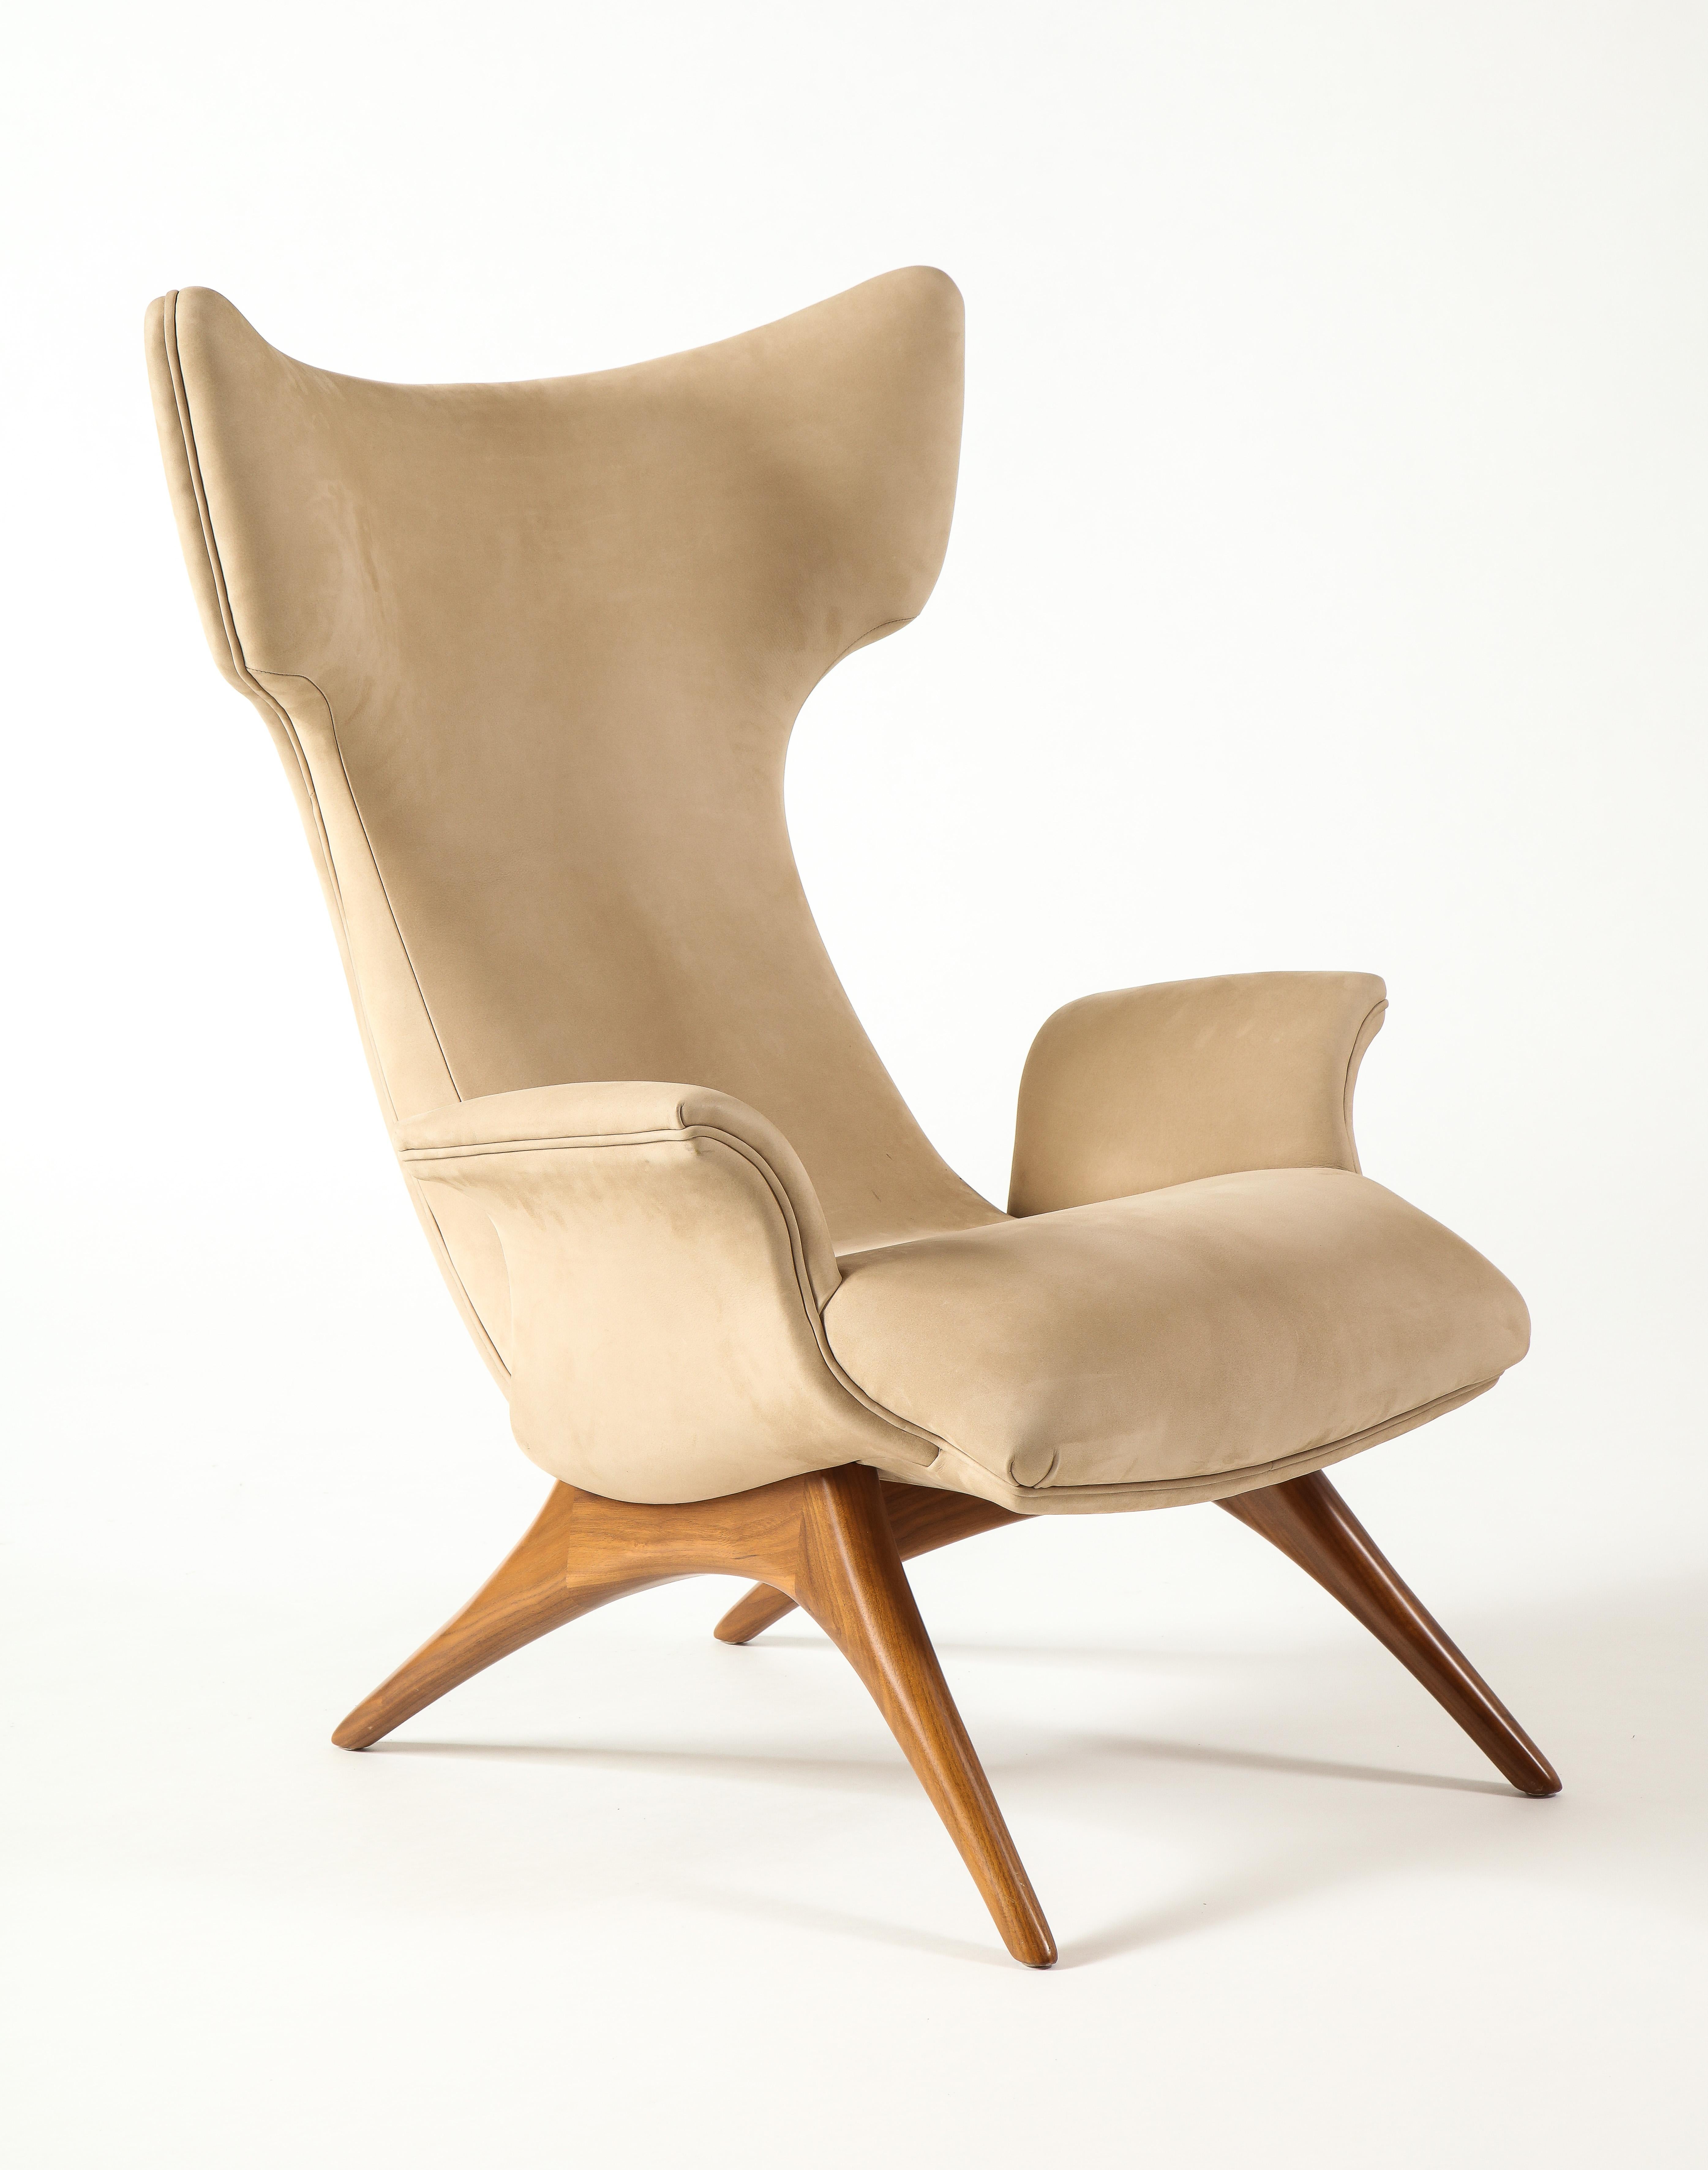 Vladimir Kagan Ondine Chair with Sueded Leather Upholstery & Natural Walnut Base 10